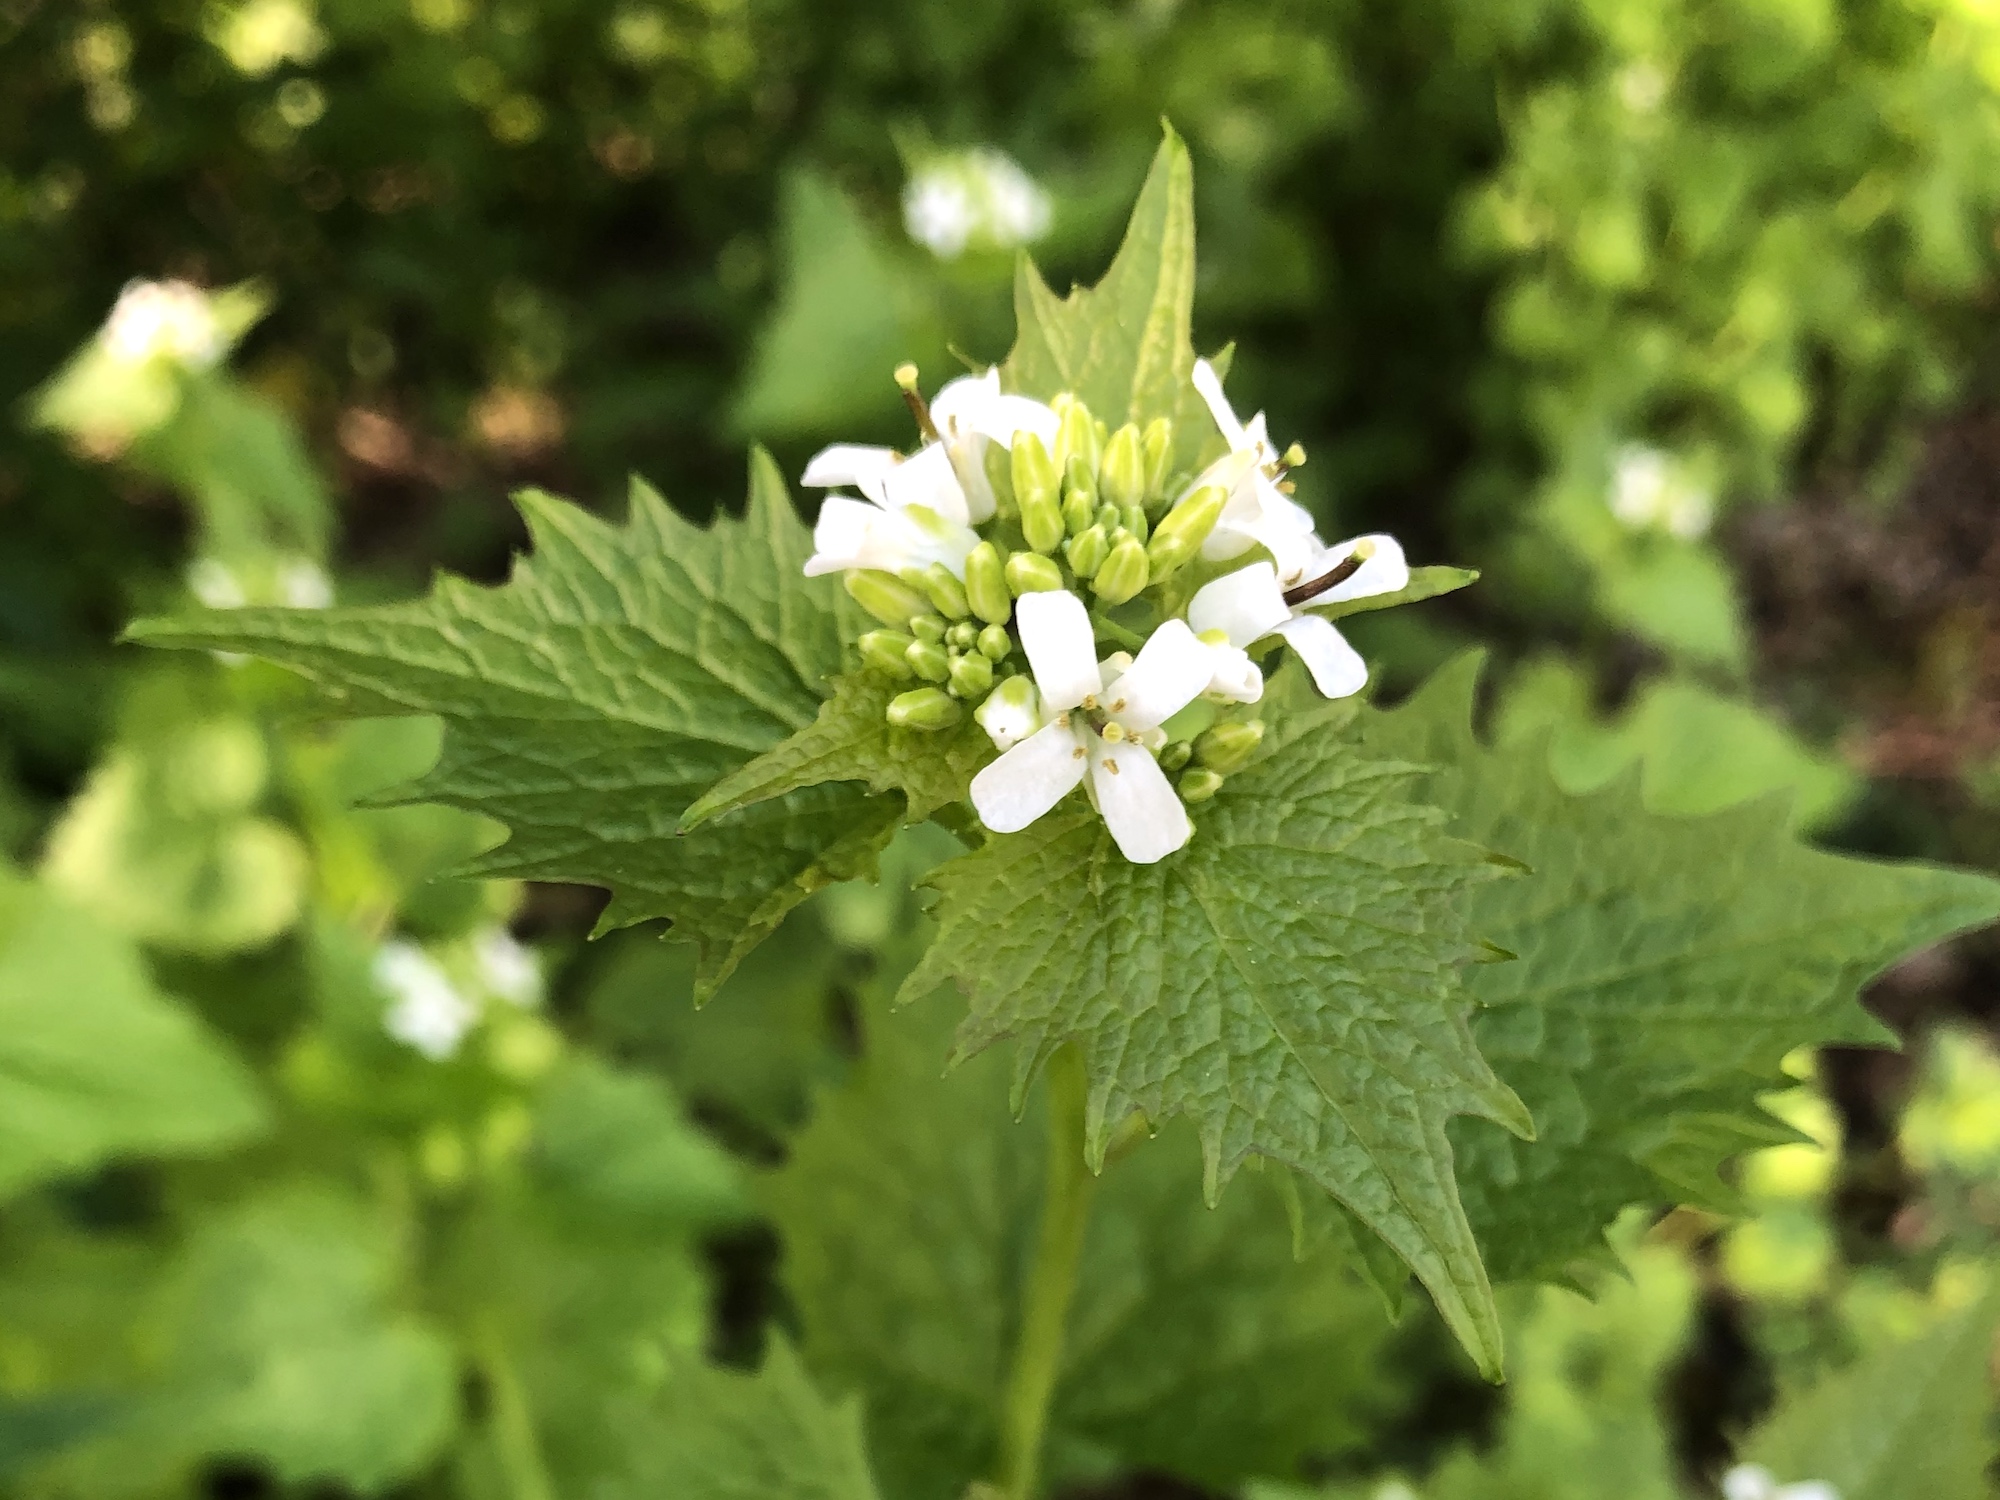 Garlic Mustard by Duck Pond in Madison, Wisconsin on May 16, 2020.